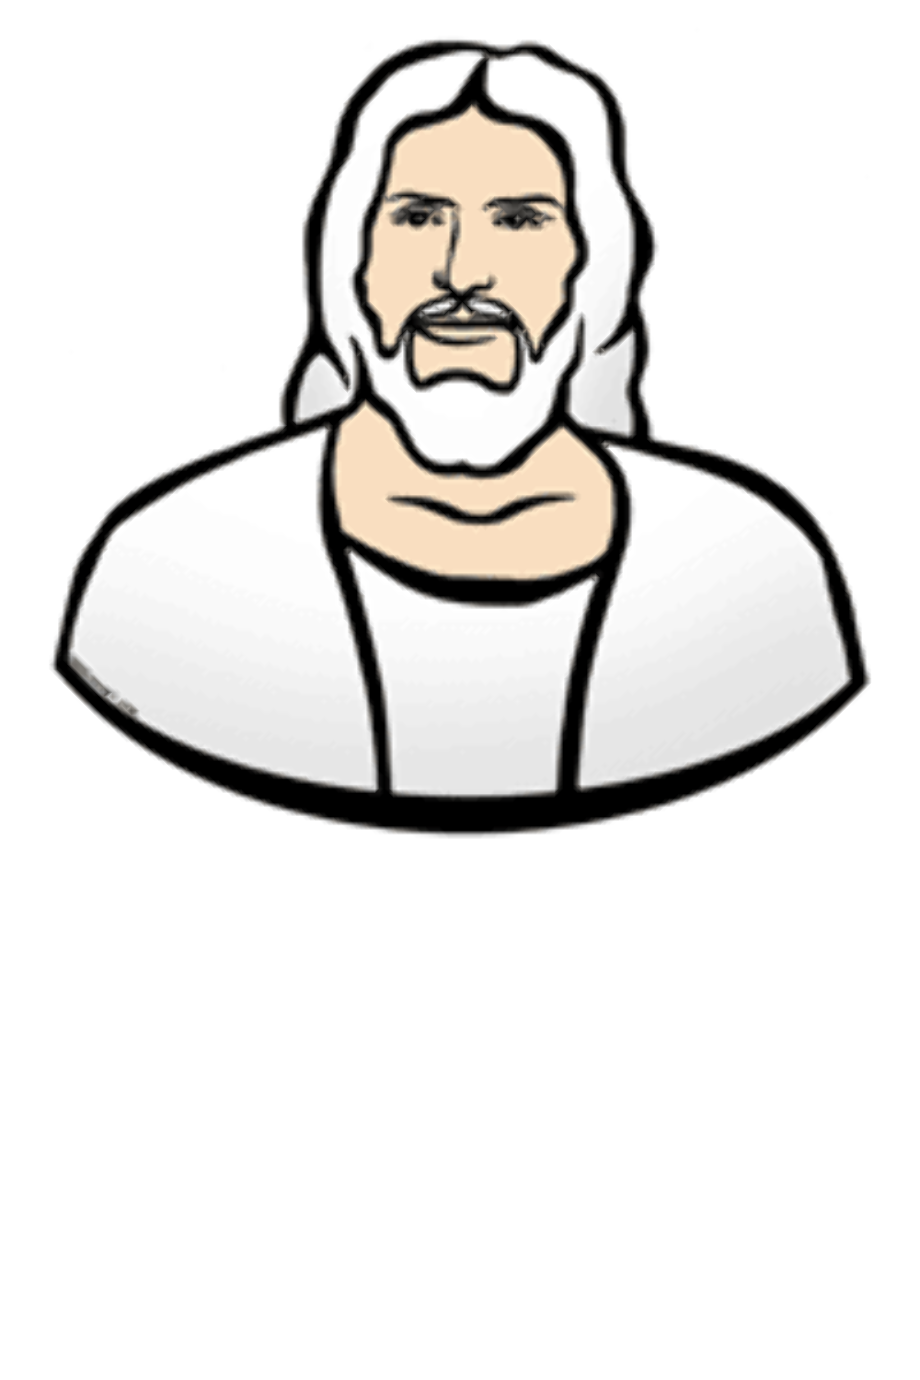 lds clipart heavenly father